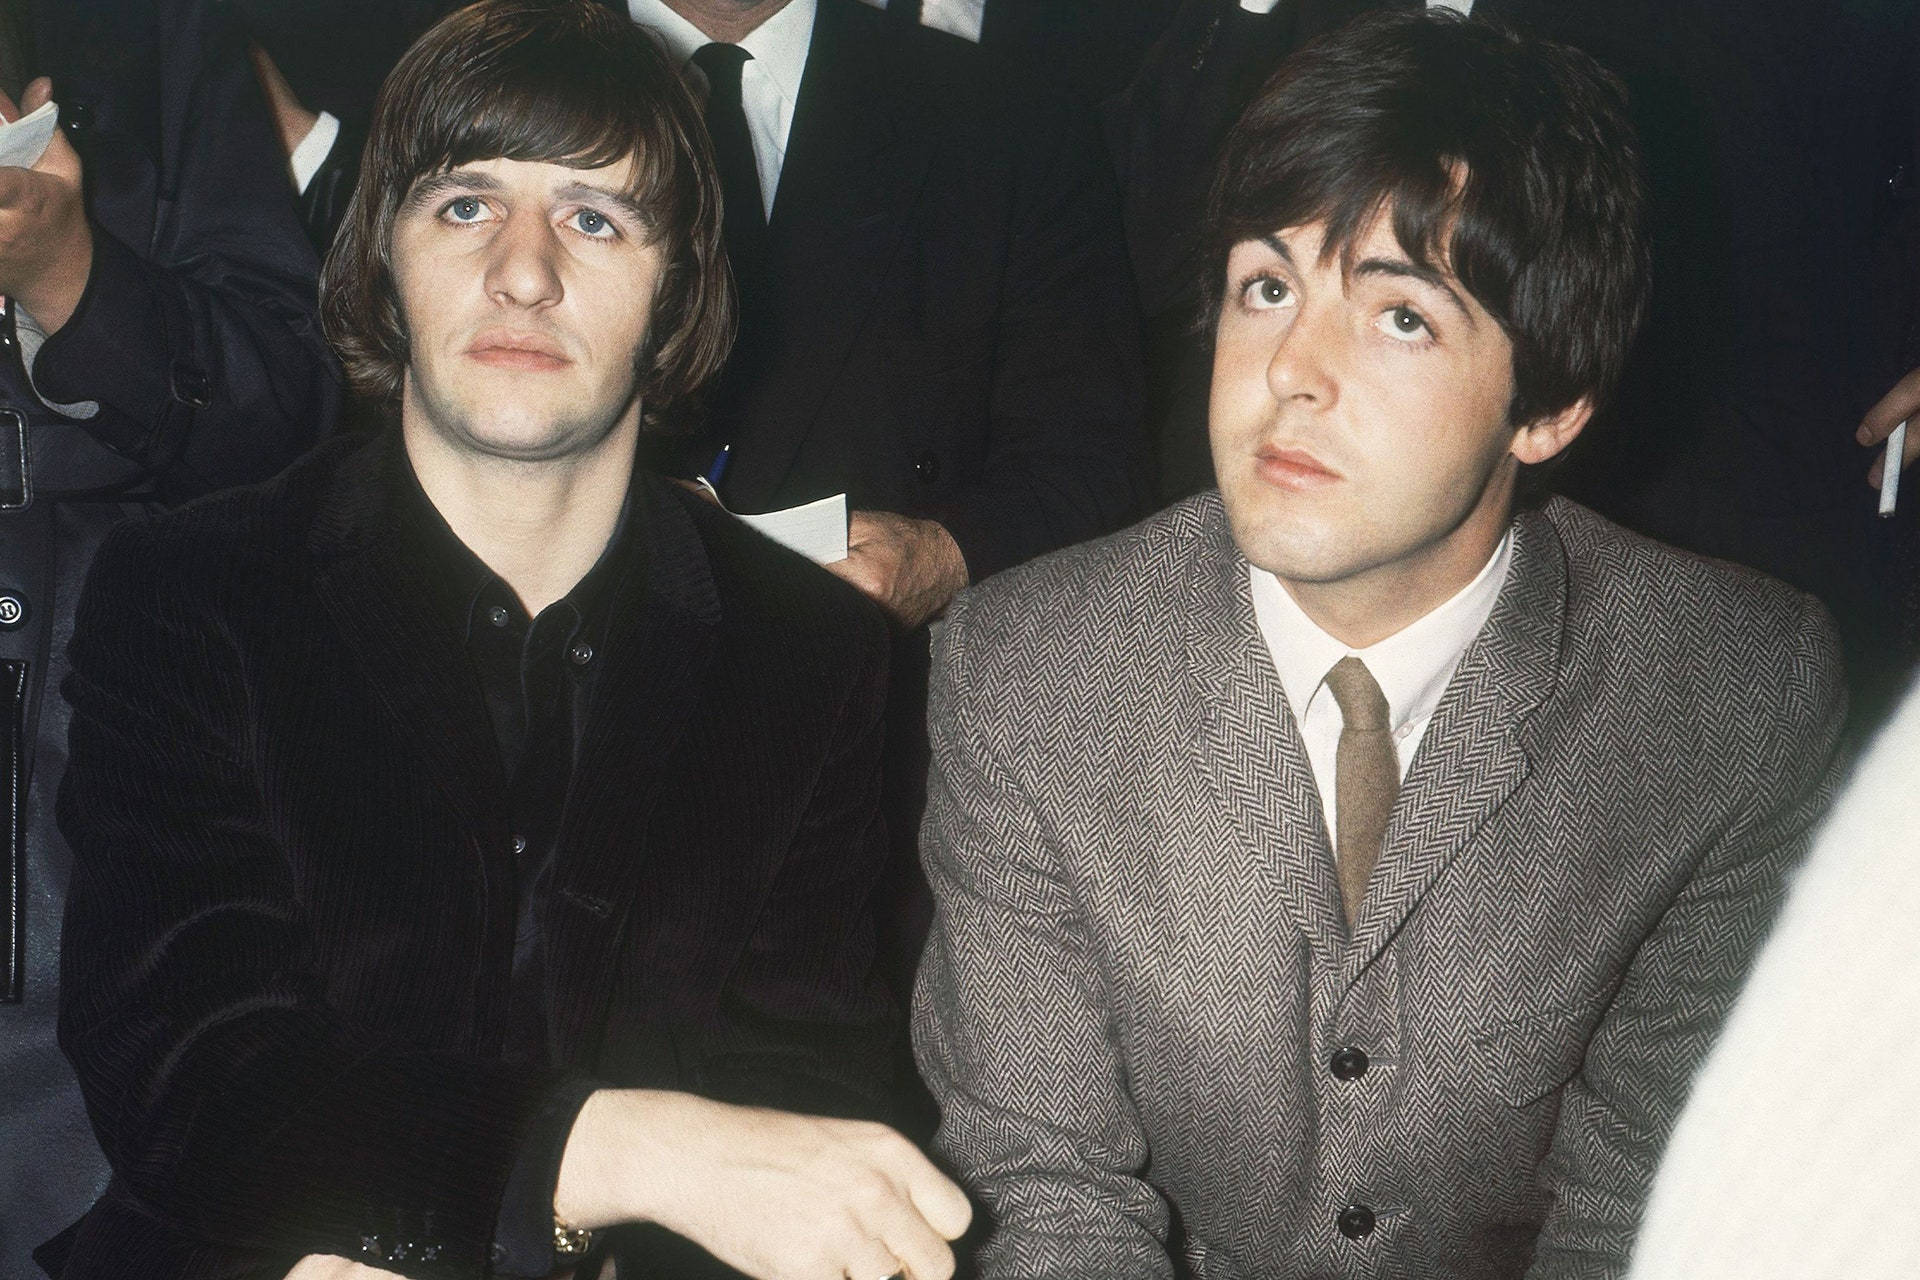 Iconic Beatles' members Paul McCartney and Ringo Starr in classic suits Wallpaper